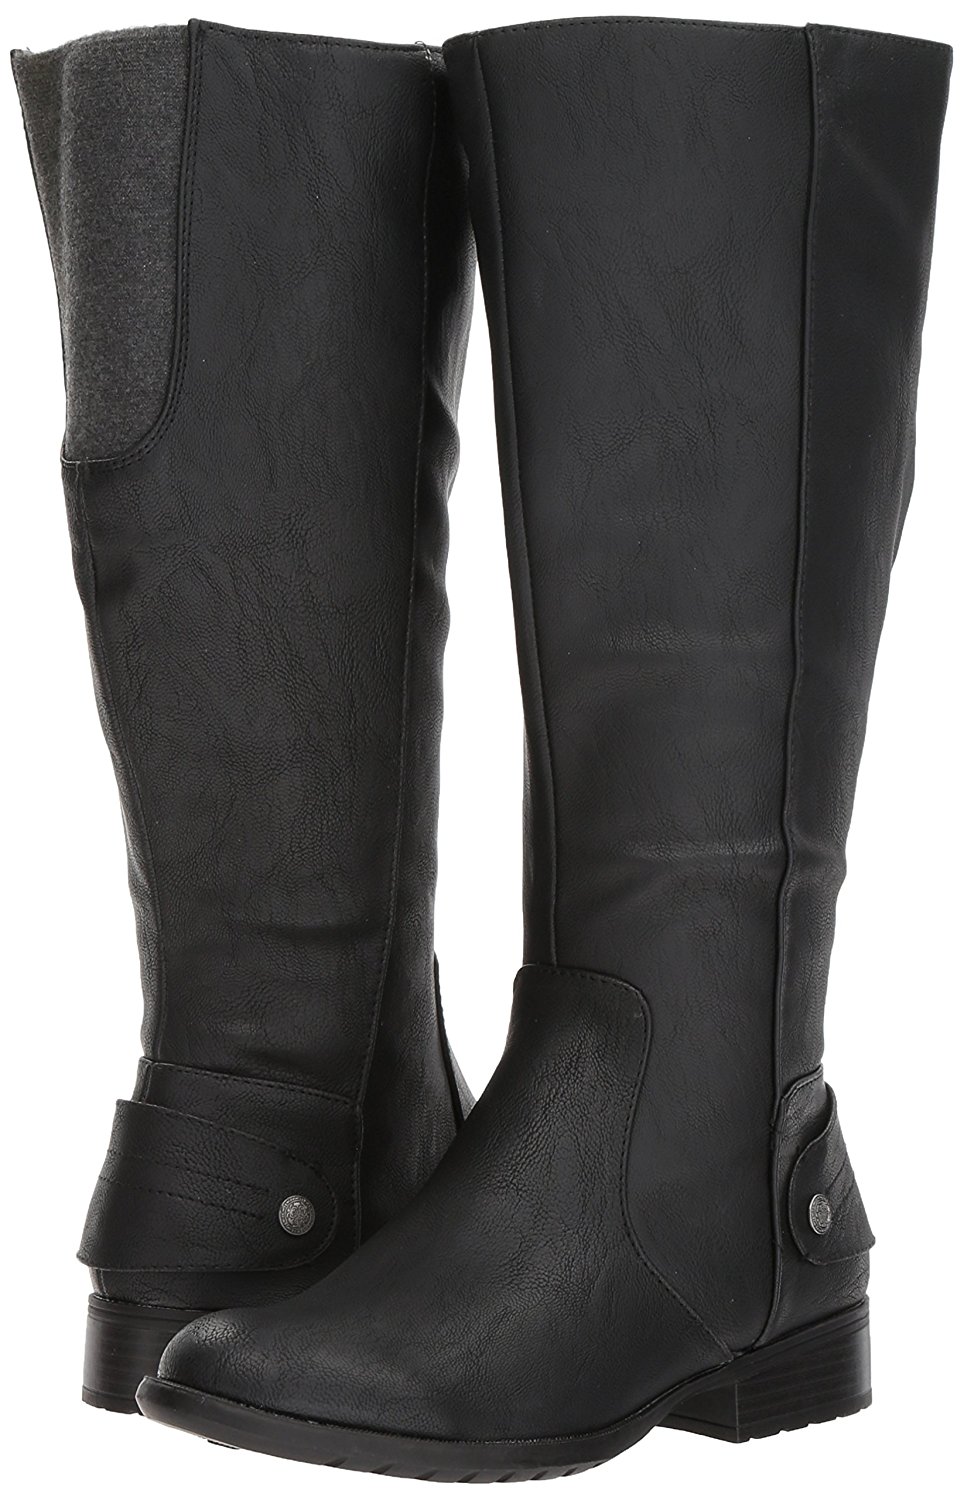 LifeStride Womens XANDY Round Toe Knee High Riding Boots, Black Wc ...